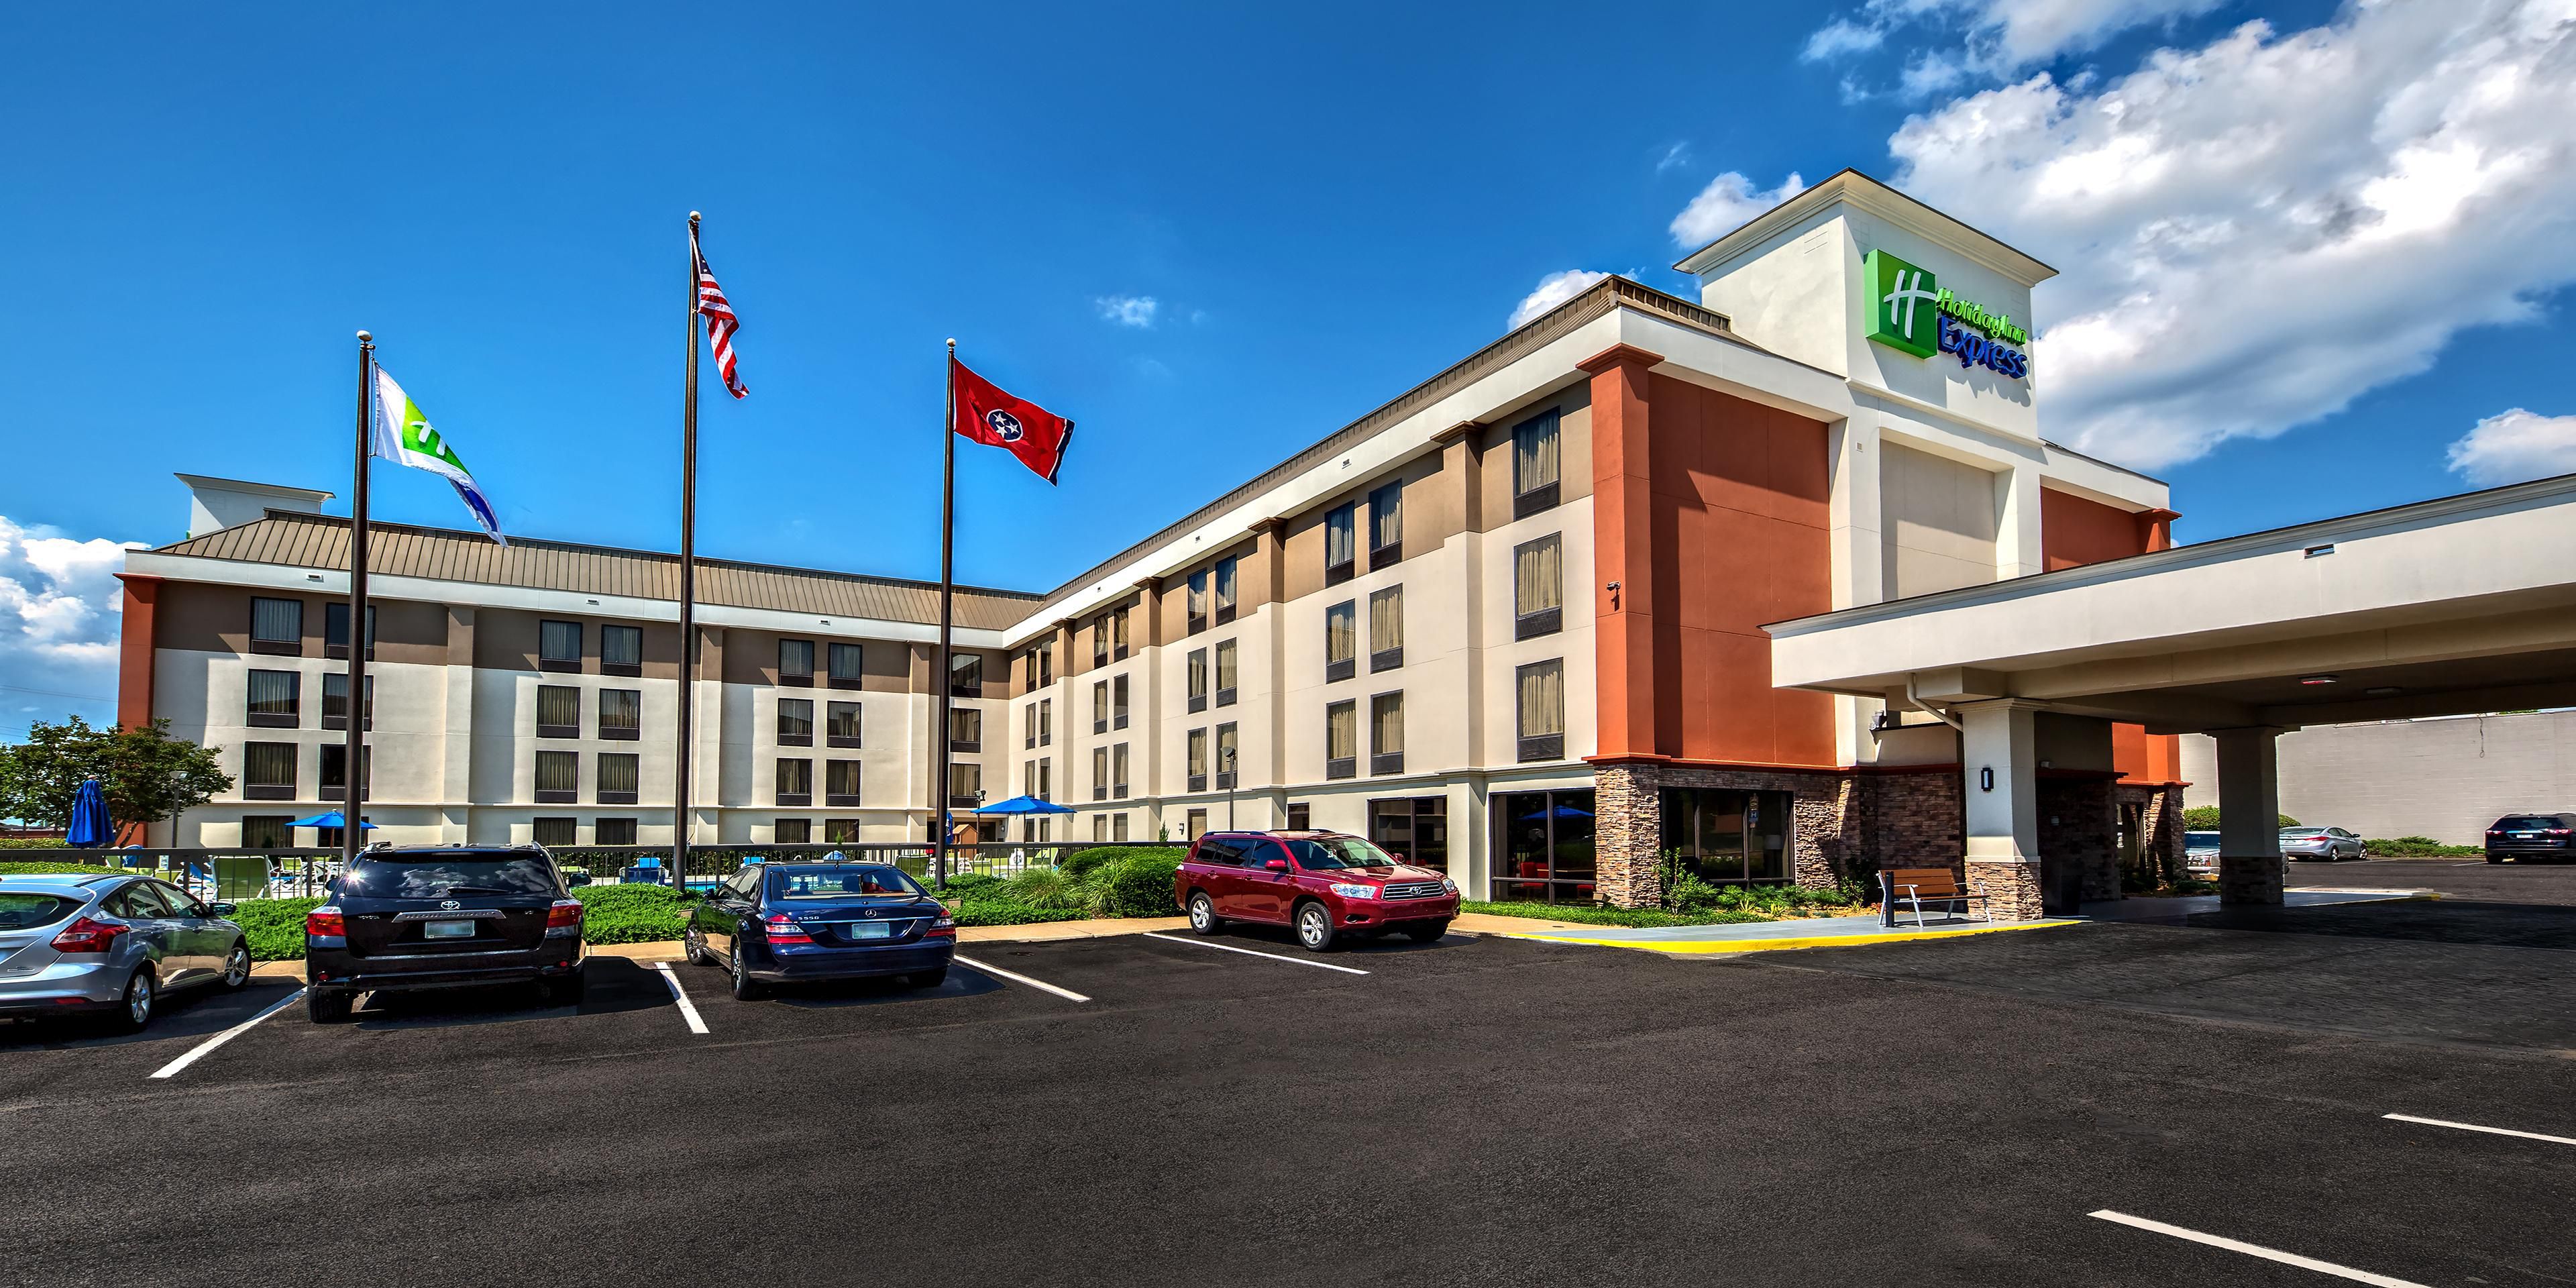 All guests receive parking access at no additional charge. Our hotel is very convenient to nearby interstate highways, I-40 and I-69. Stay with us and your car stays without any extra expense.